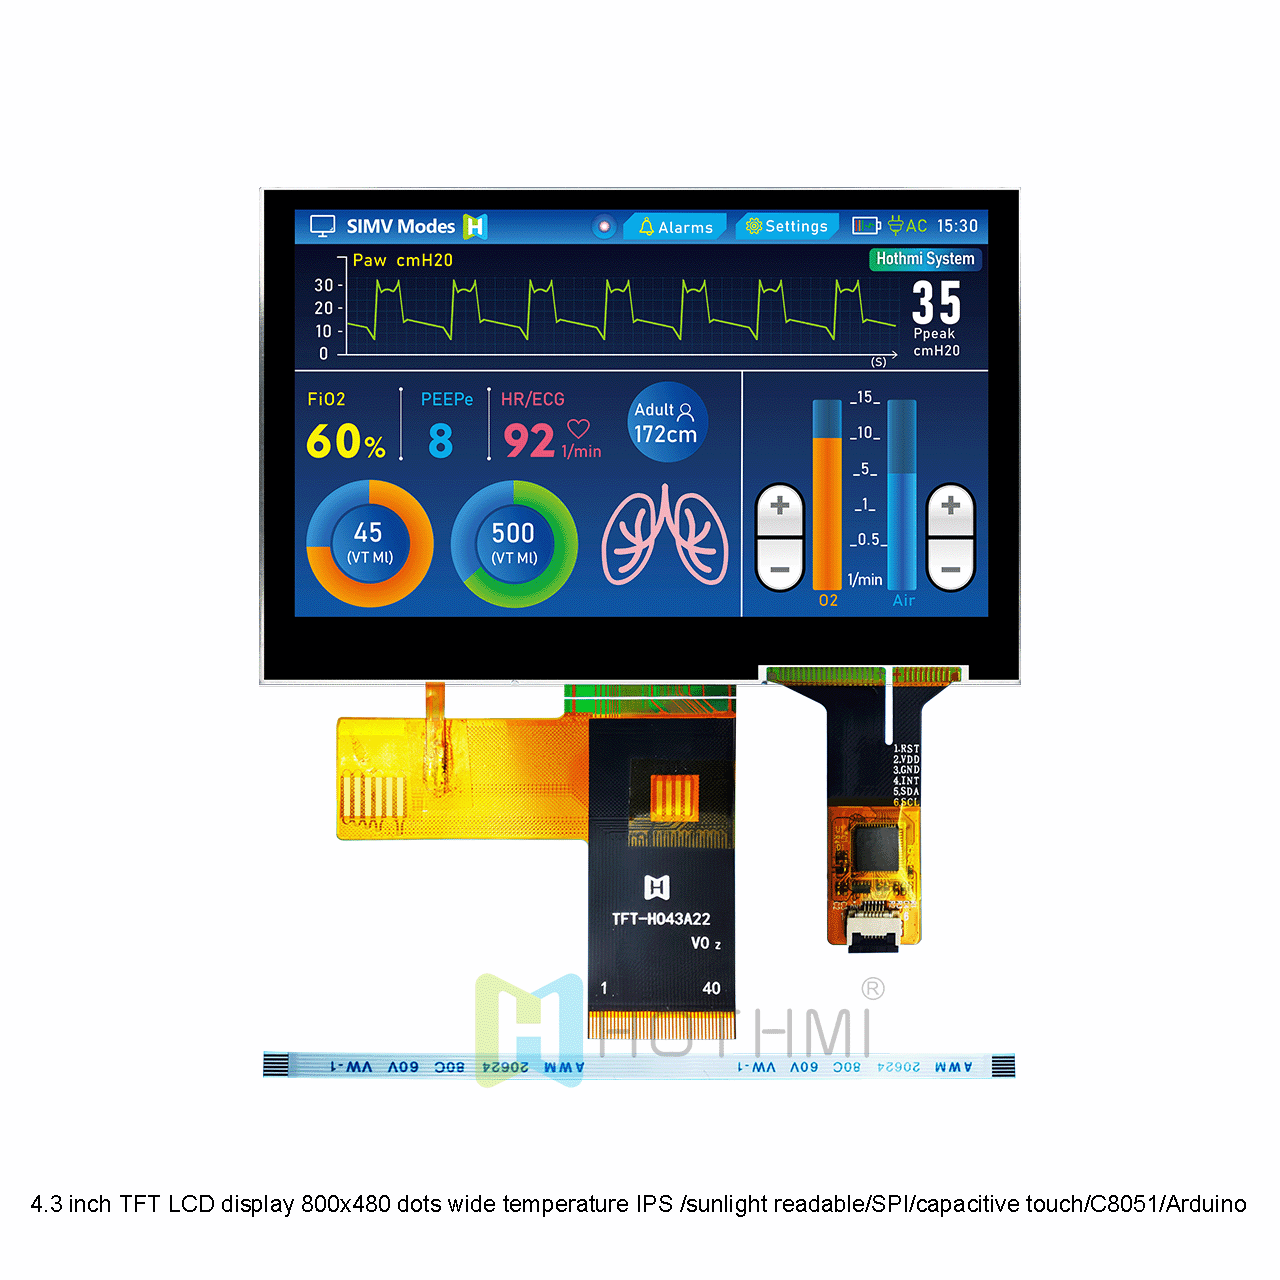 4.3 inch TFT LCD display 480x272 dots wide temperature IPS full viewing angle/sunlight readable/SPI interface/capacitive touch compatible with C8051/Arduino/STM32